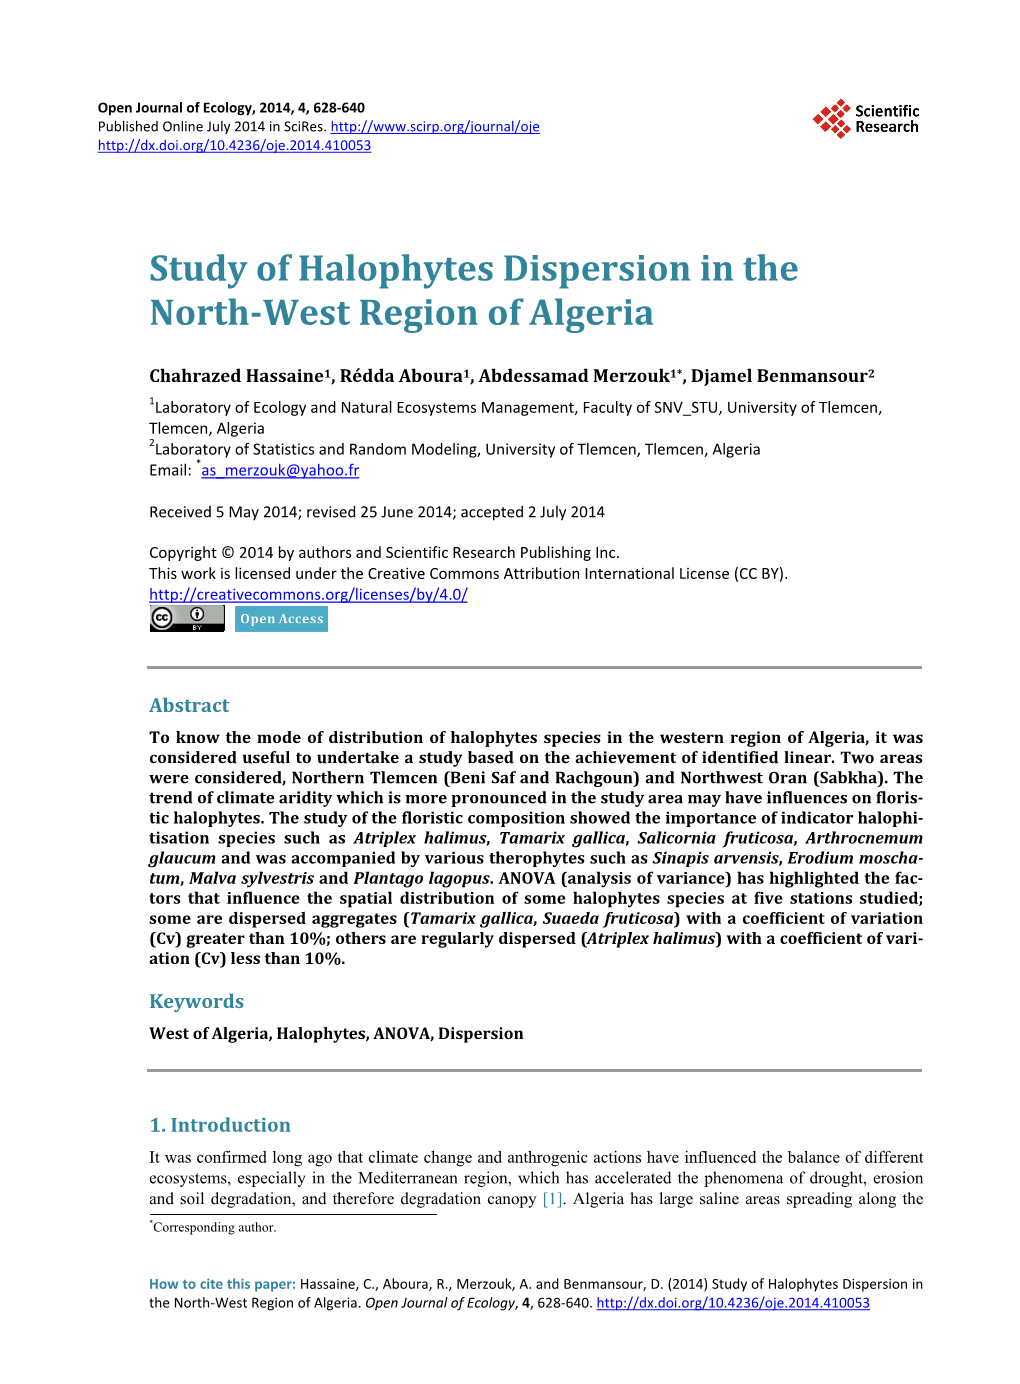 Study of Halophytes Dispersion in the North-West Region of Algeria